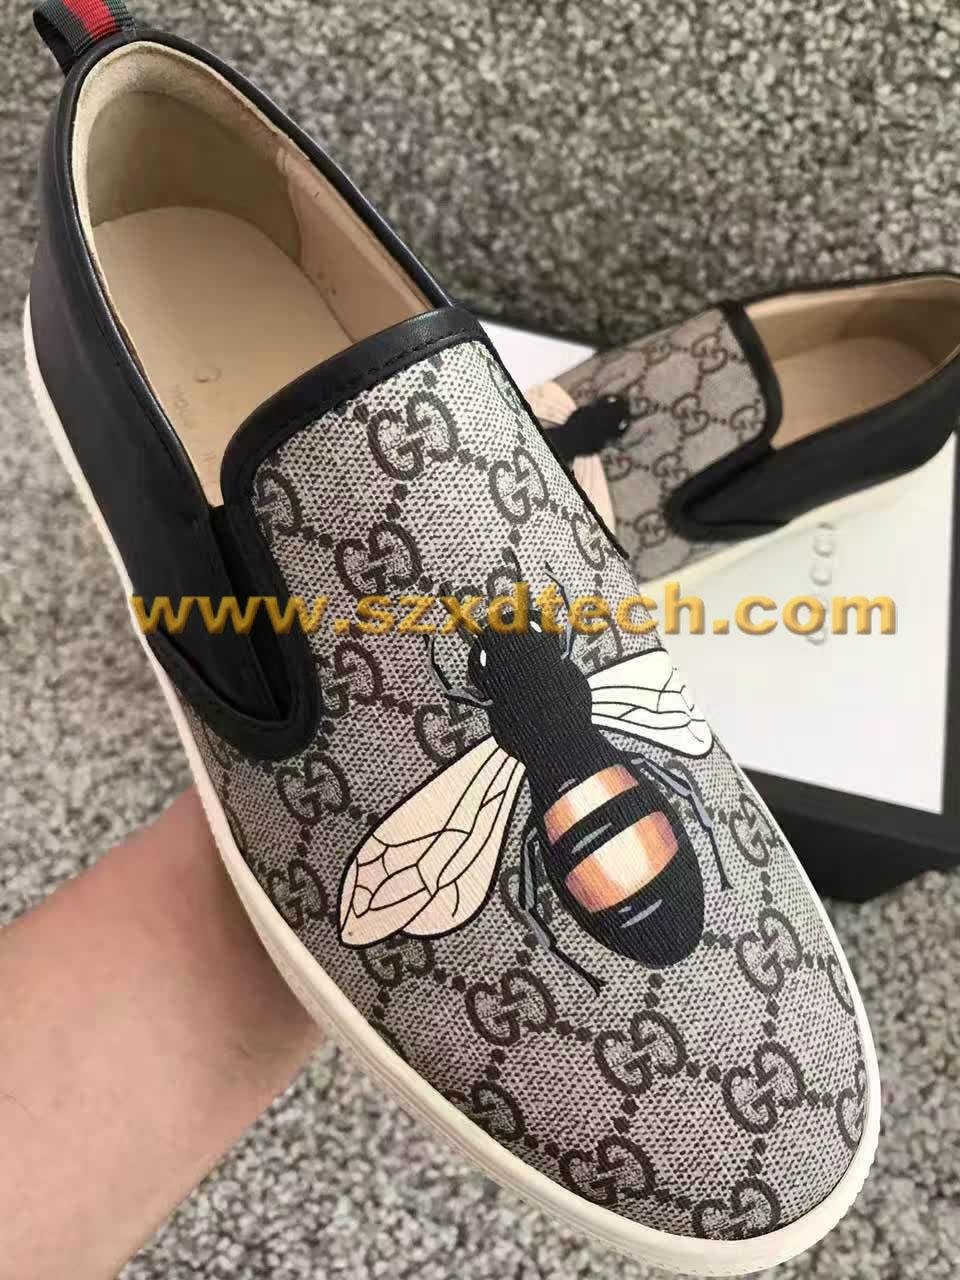 Wholesale Gucci Shoes Men Loafers Gucci shoes High Quality replica cucci shoes - XD-Gucci 3 ...